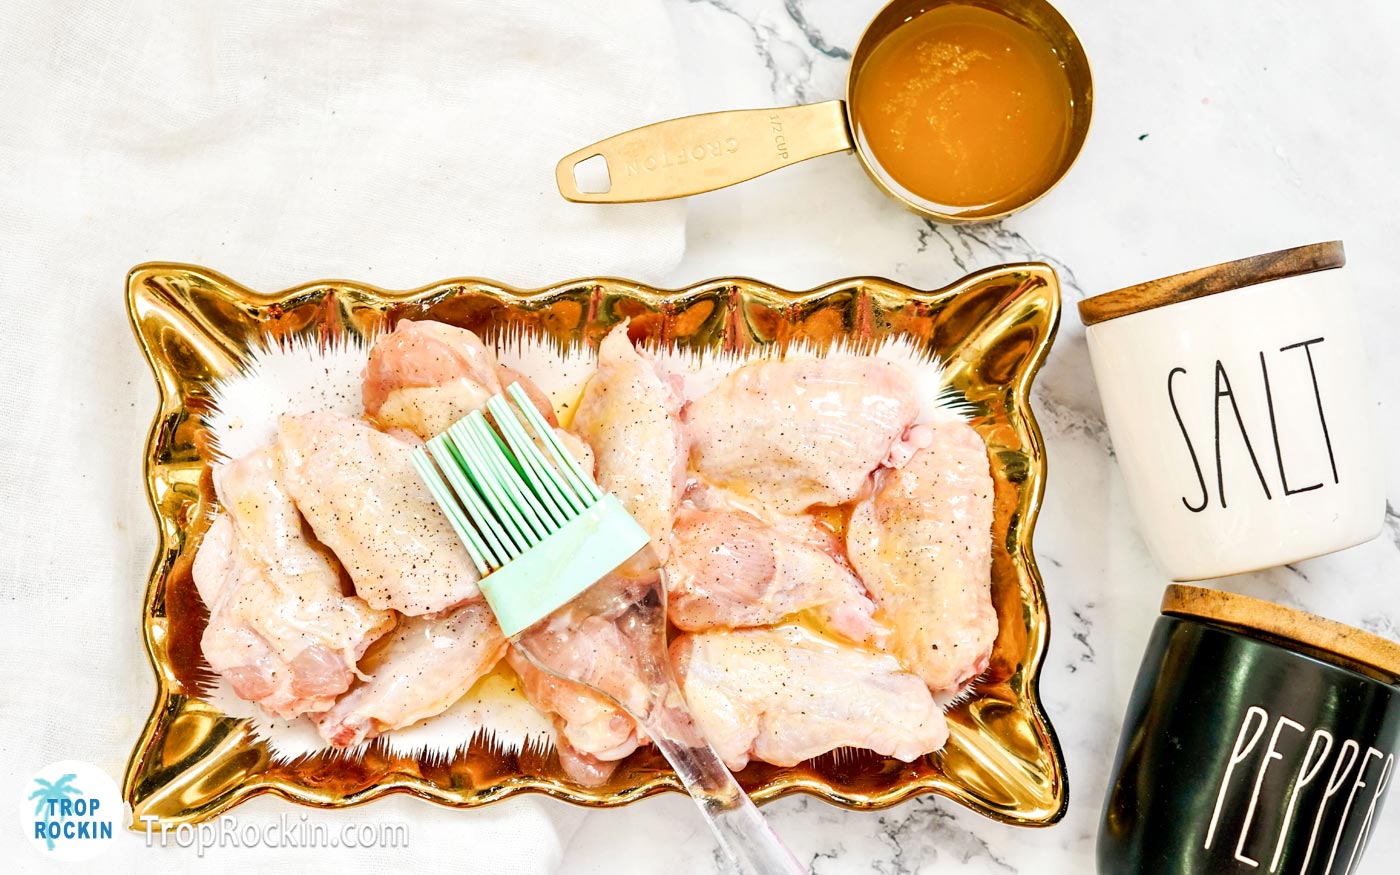 Raw chicken wings with butter brushed on with a pasty brush.